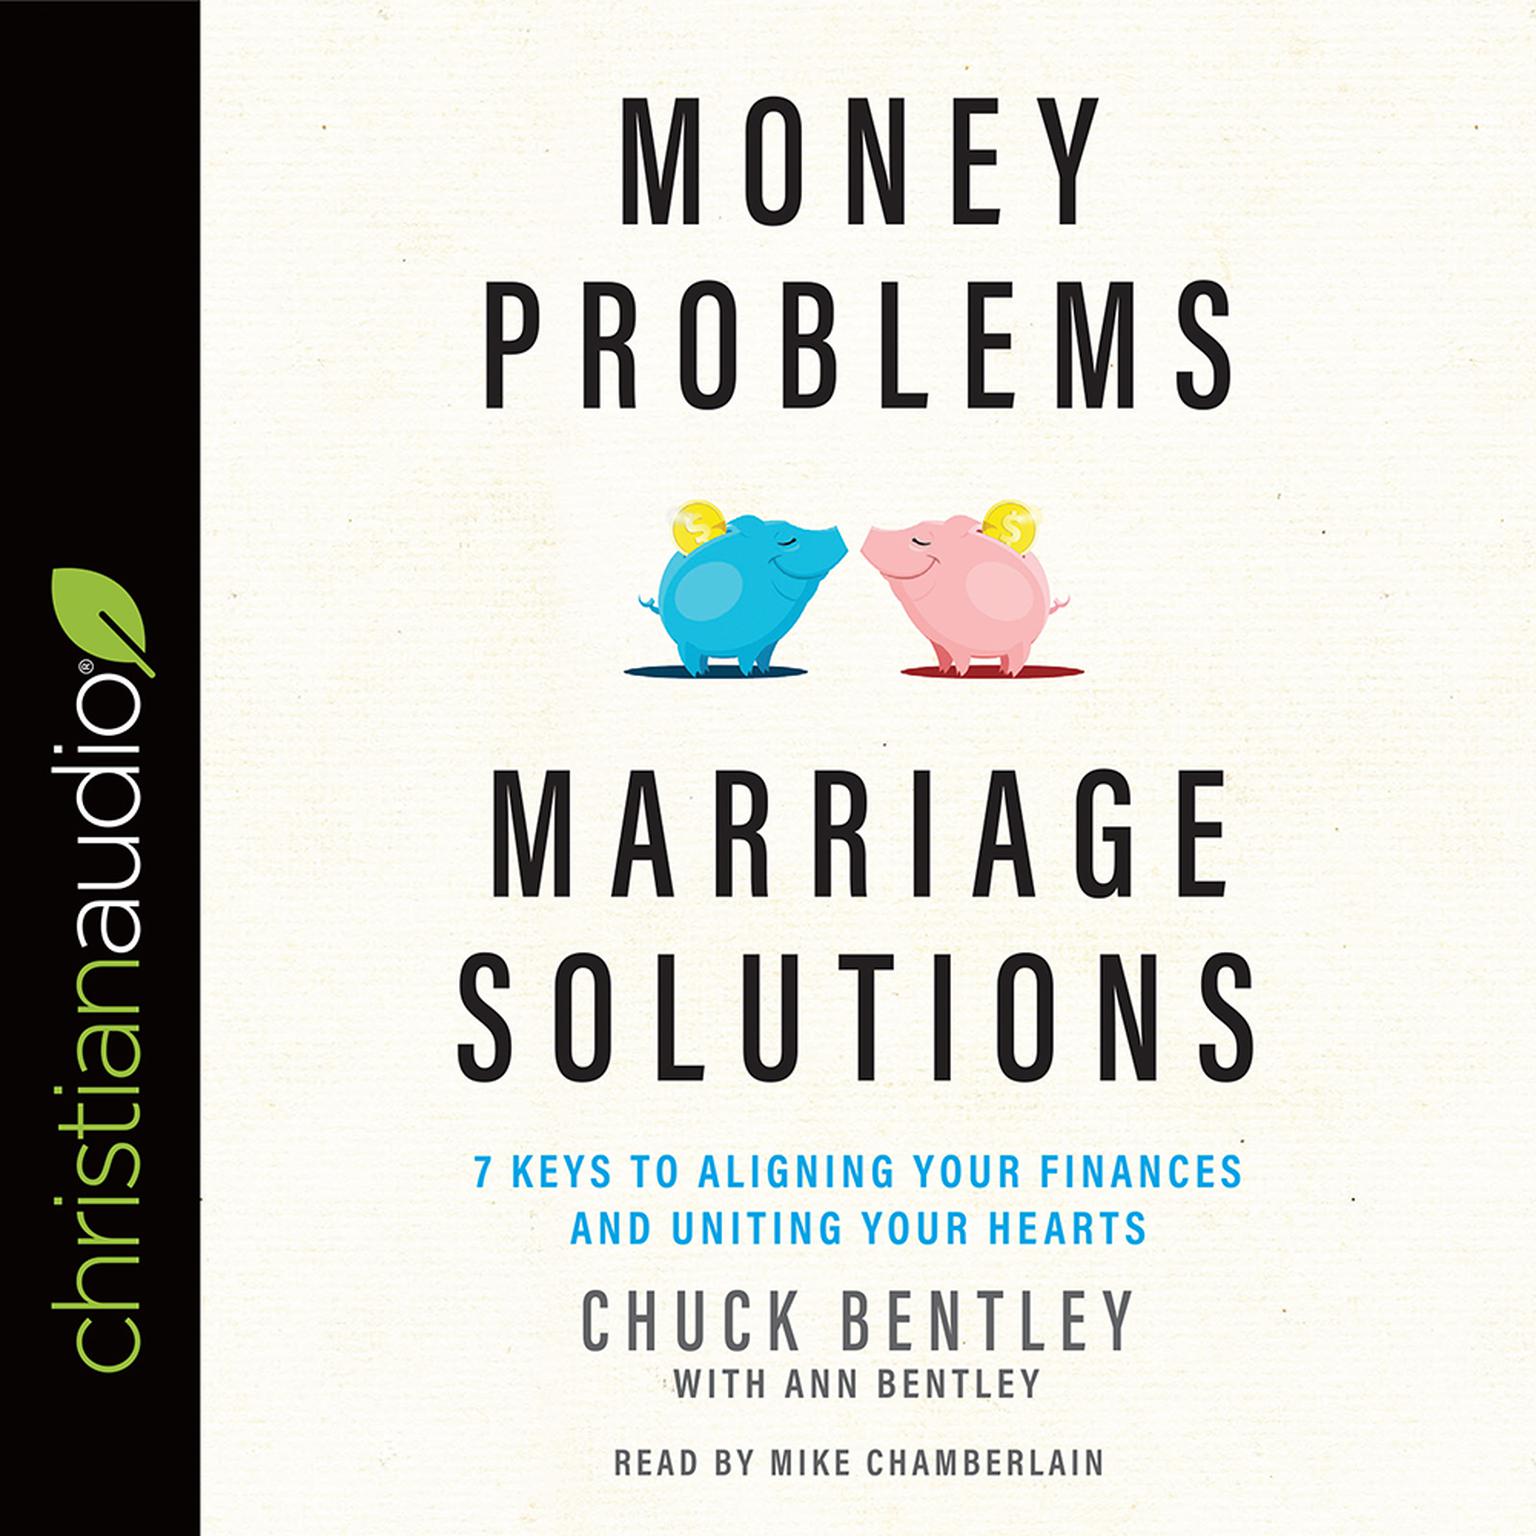 Money Problems, Marriage Solutions: 7 Keys to Aligning Your Finances and Uniting Your Hearts Audiobook, by Chuck Bentley